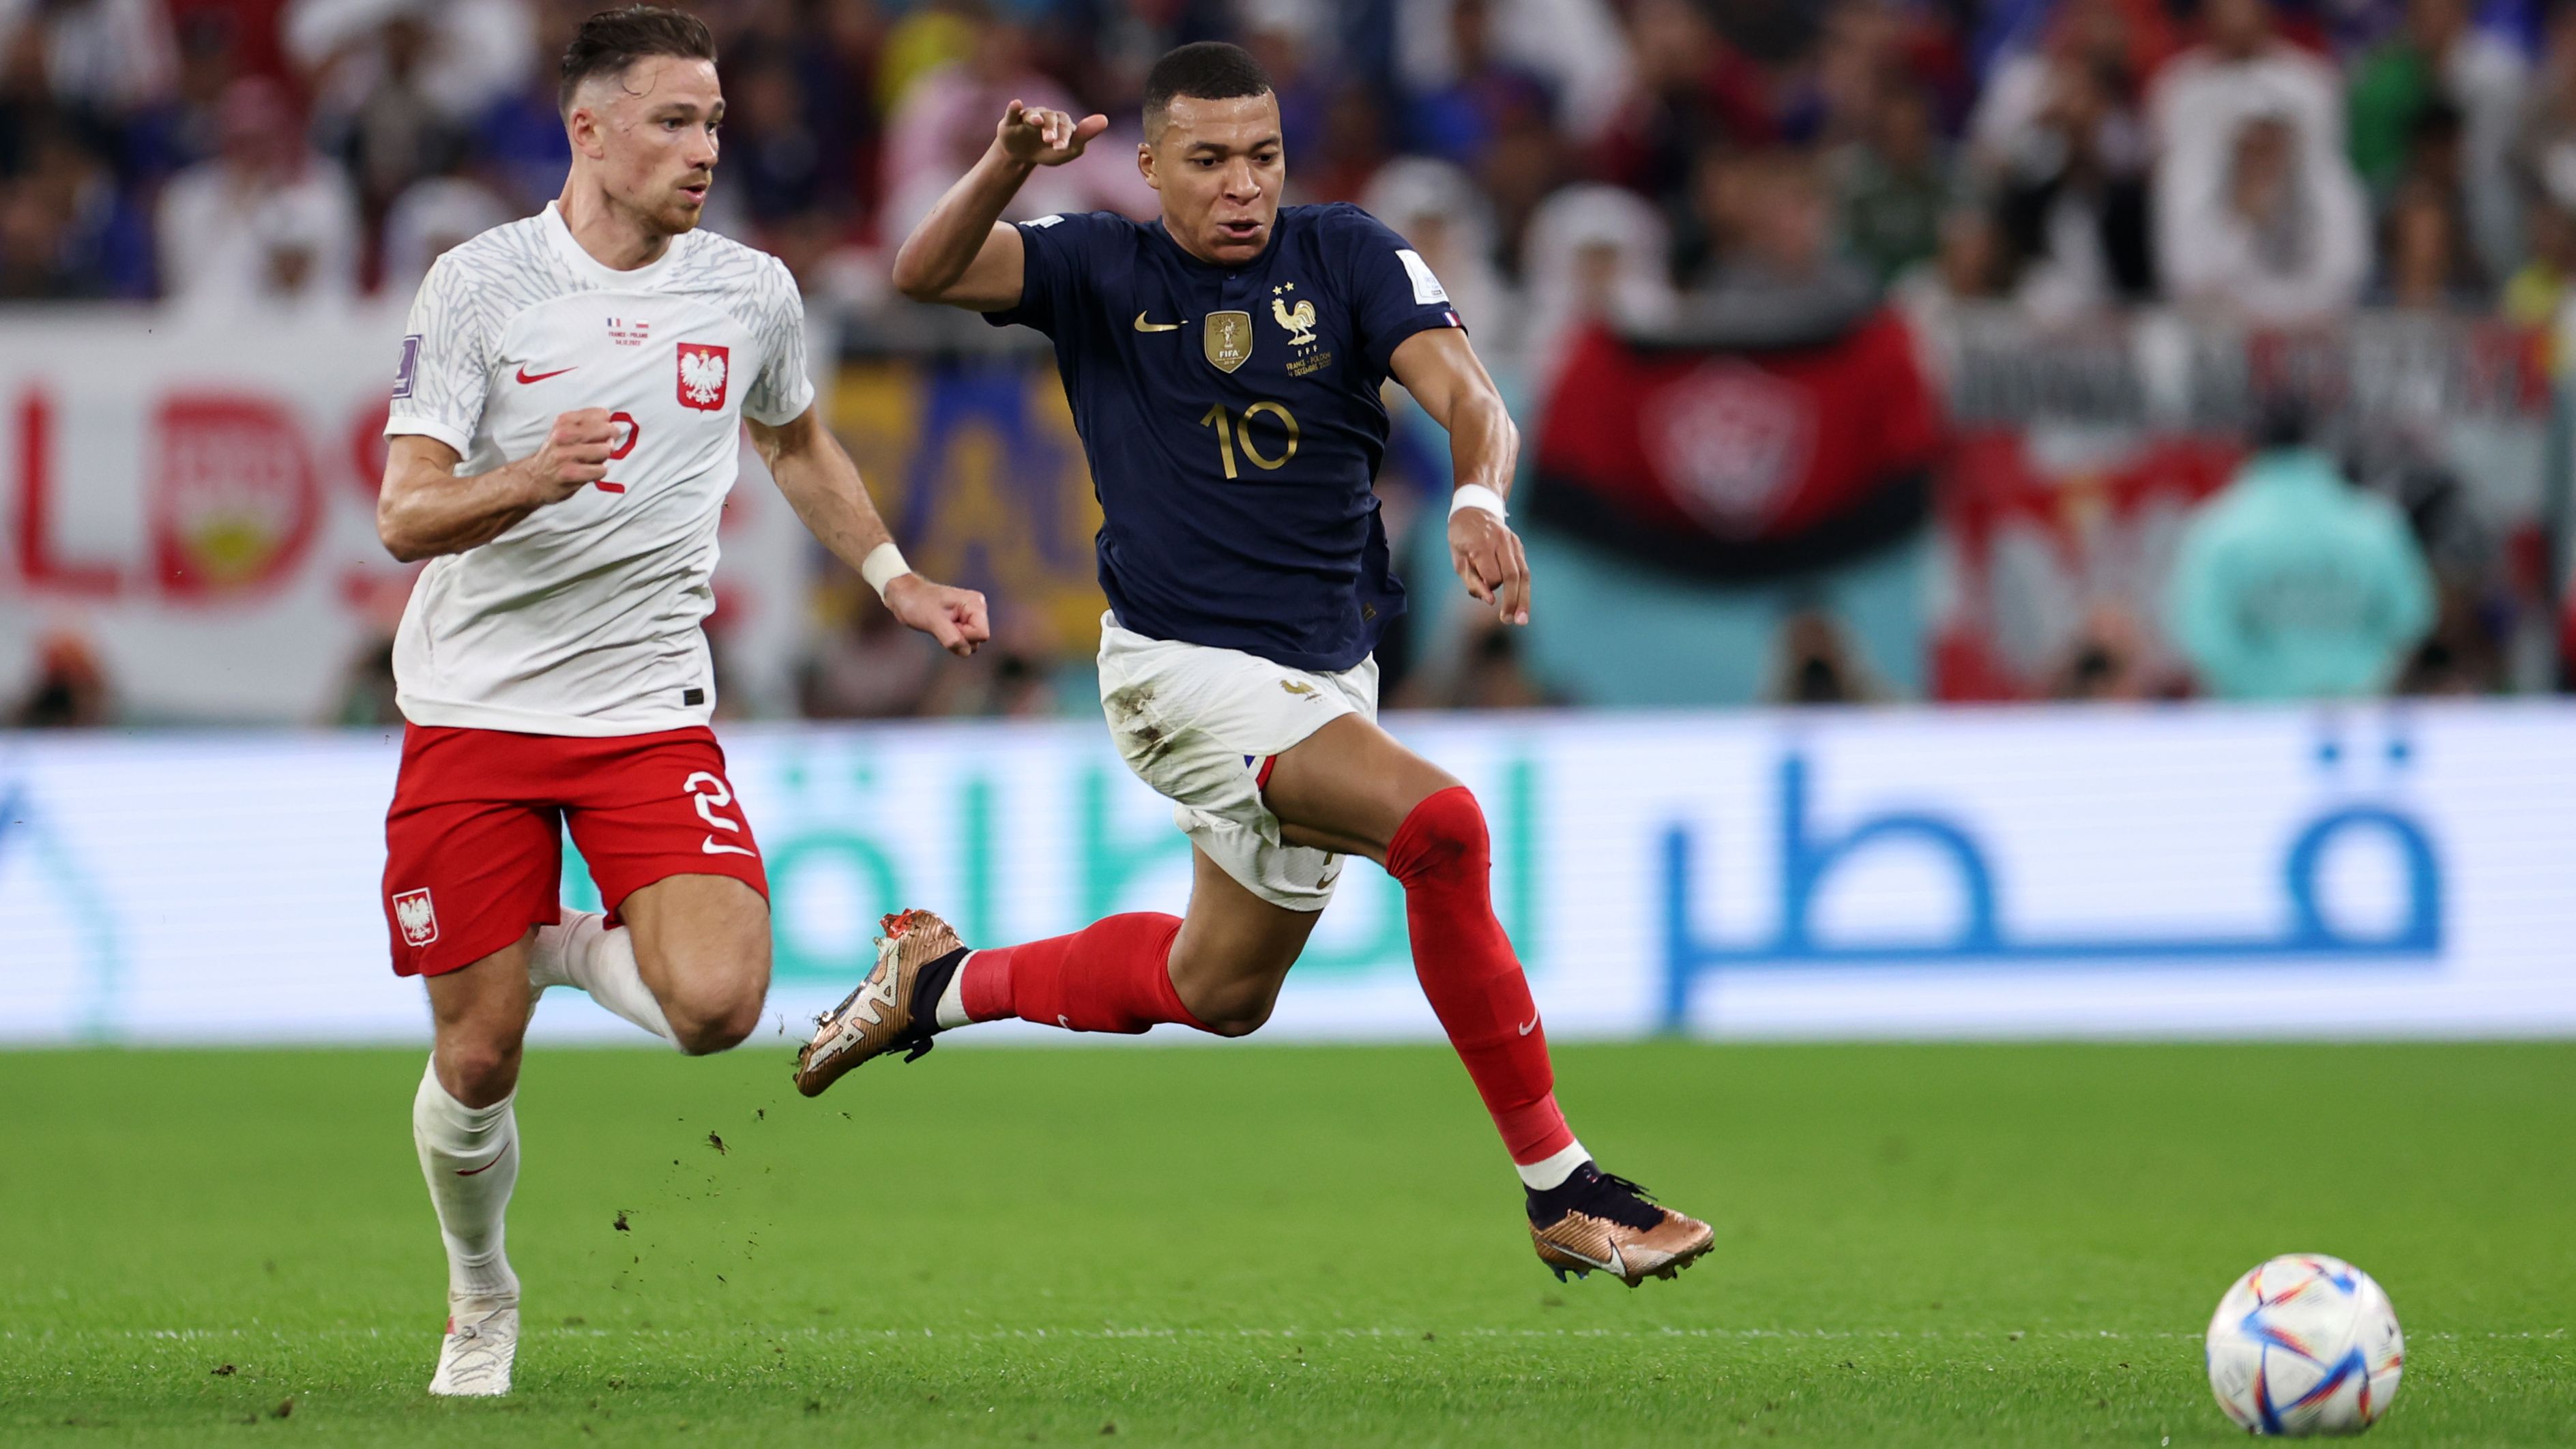 Catch him if you can ... Mbappé runs with the ball under pressure from Poland's Matty Cash. 